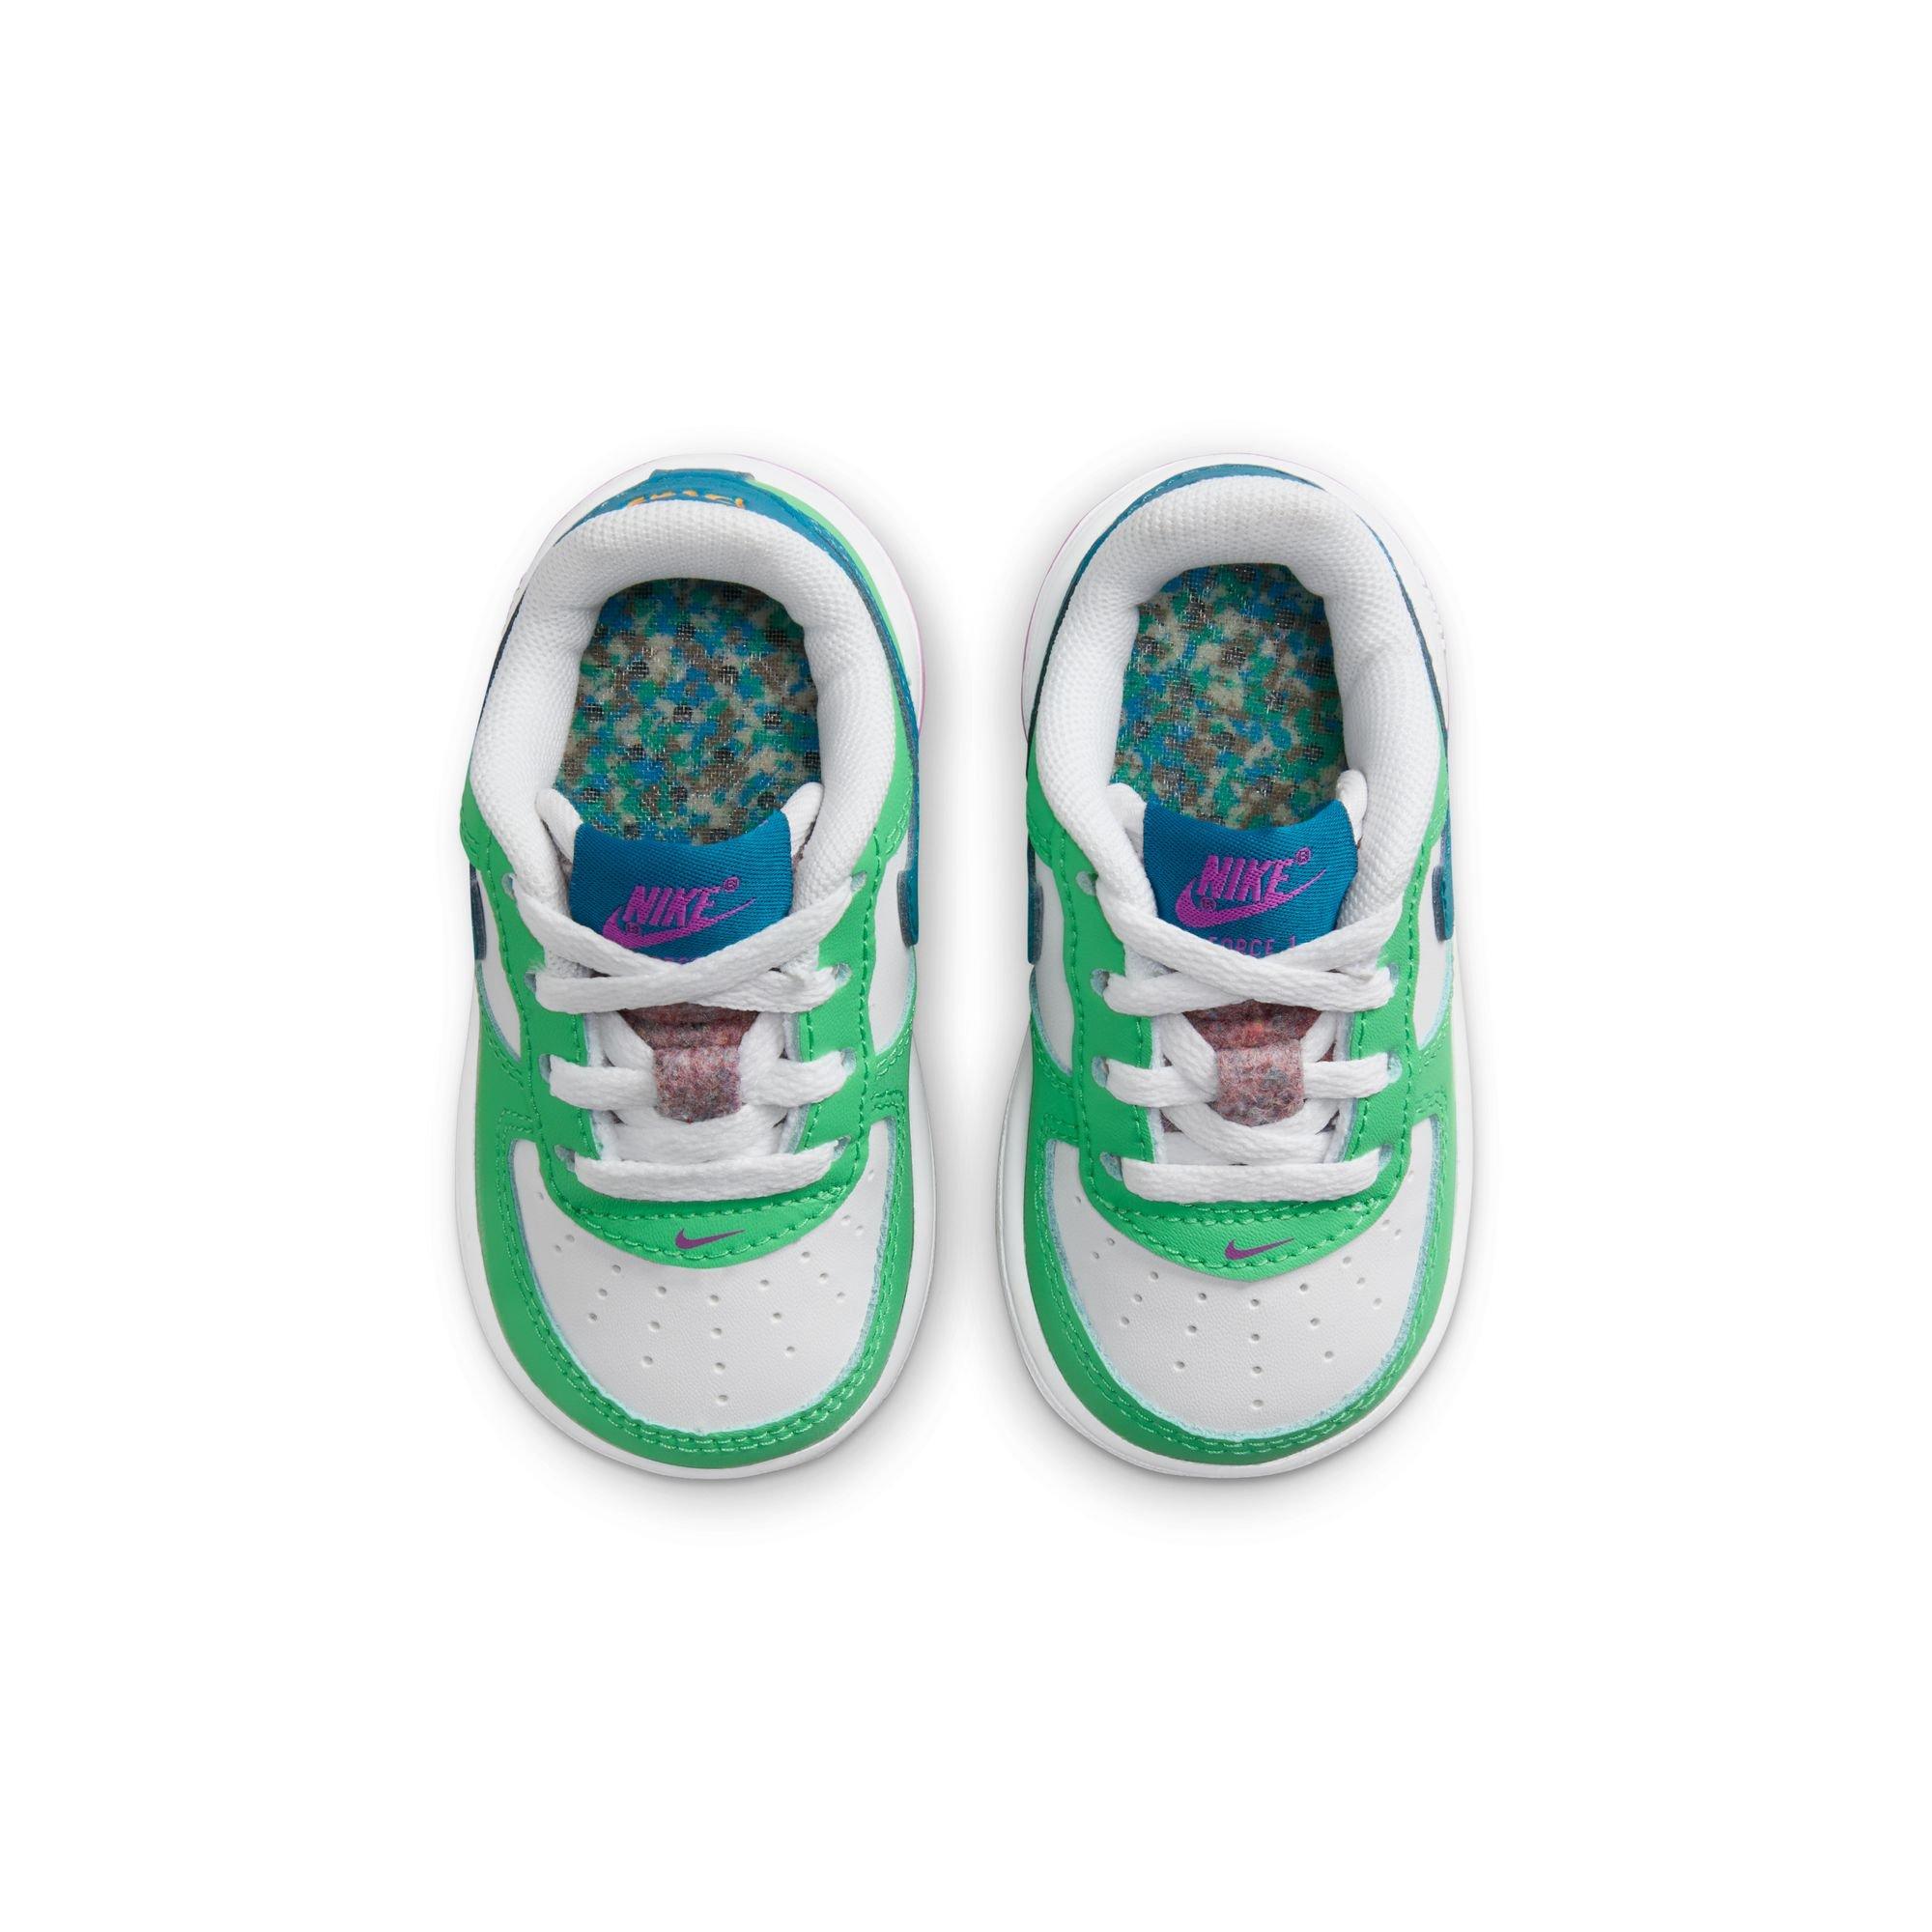 Nike Kids Force 1 LV8 BT (Infant/Toddler) (White/Green Abyss/Spring Green)  Kid's Shoes - ShopStyle